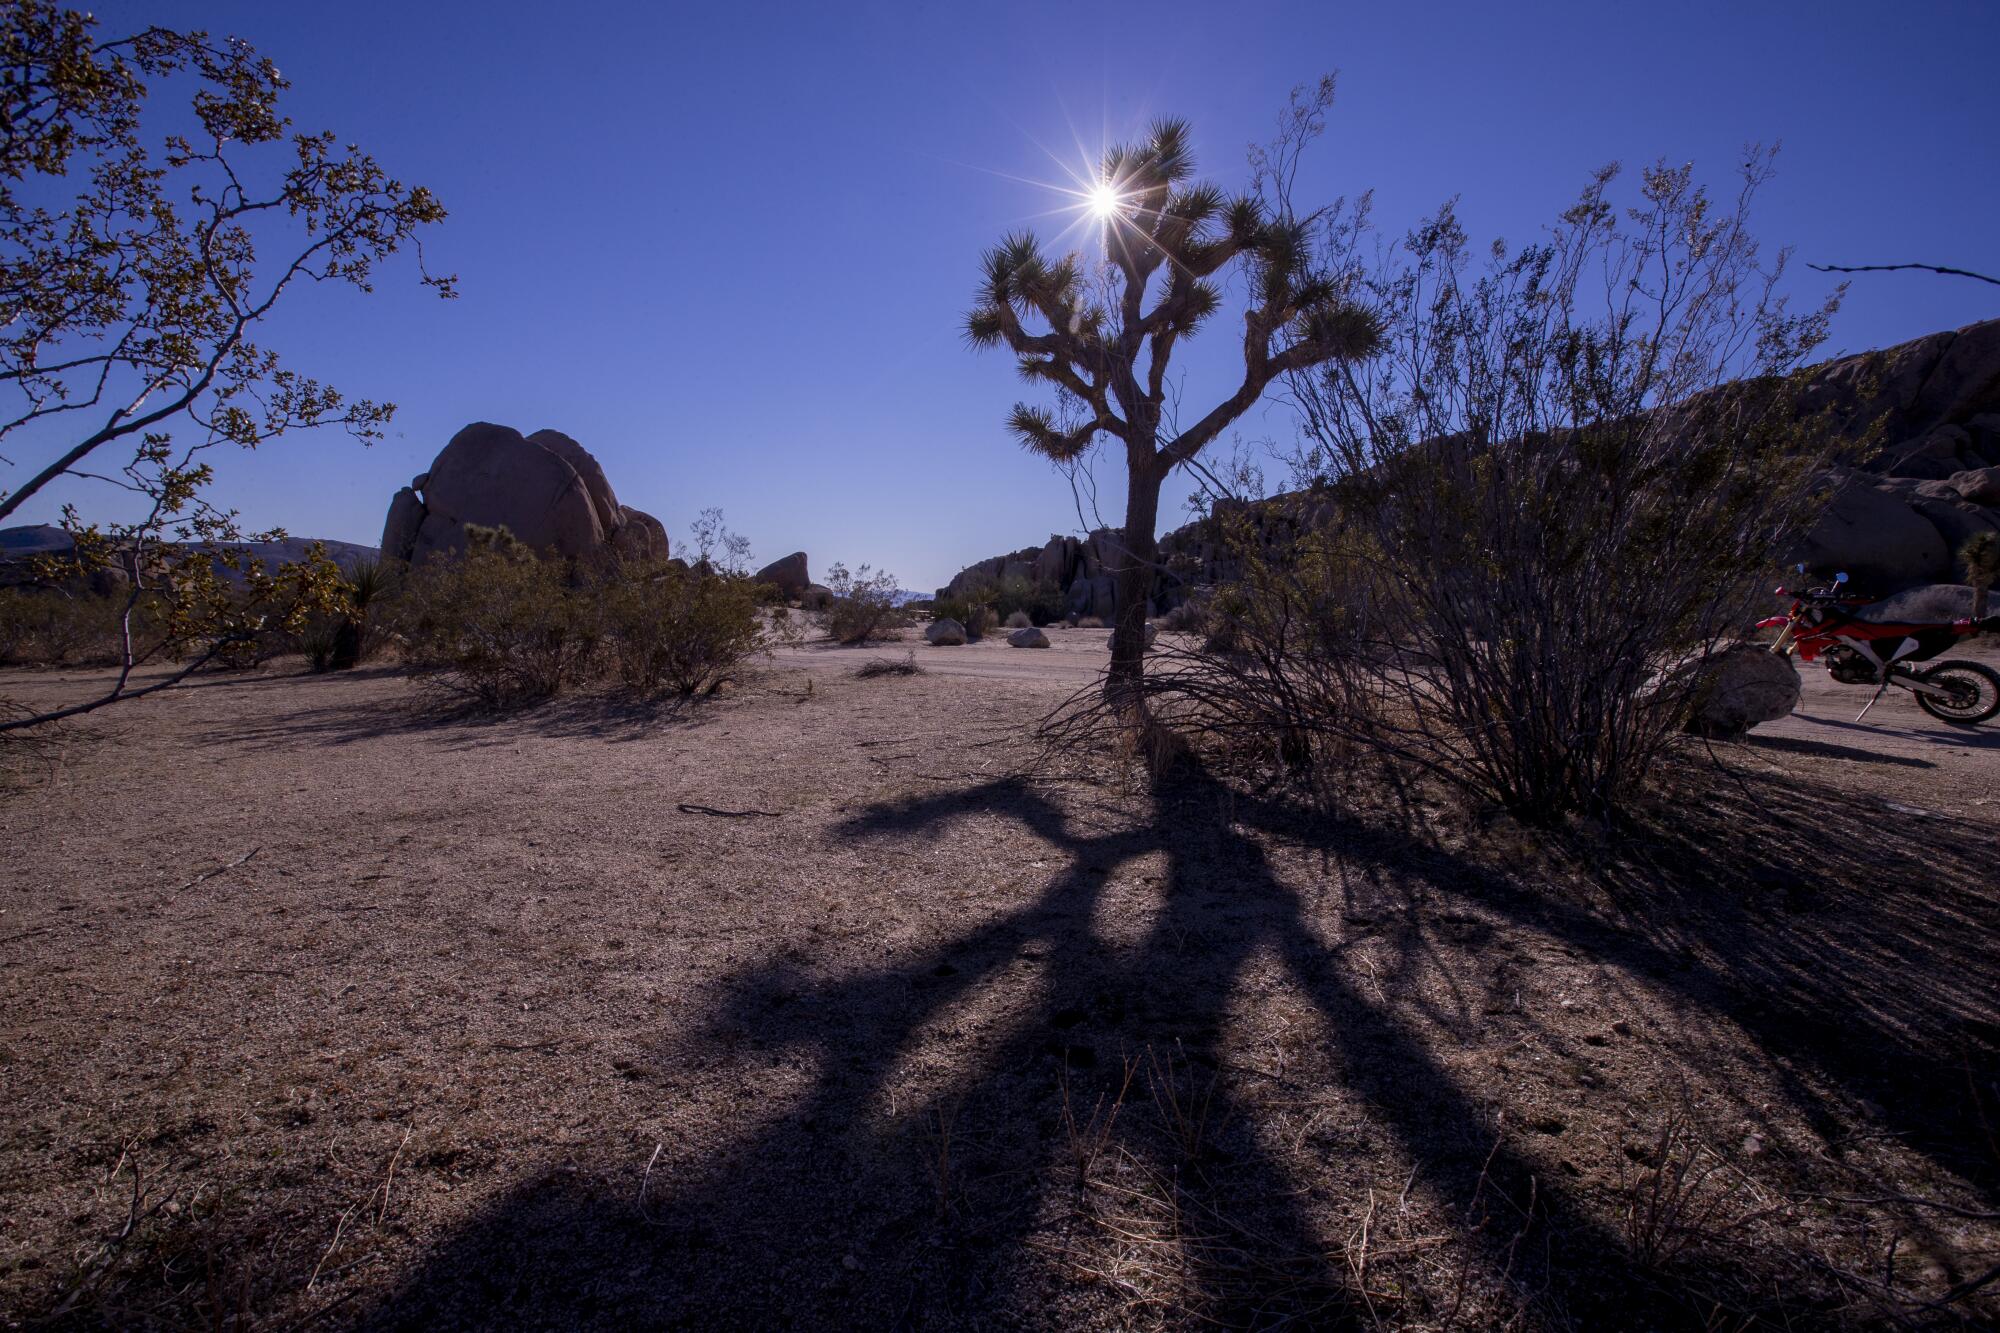 The sun shines through the limbs of a Joshua tree at sunrise. Long shadows stretch across the ground.